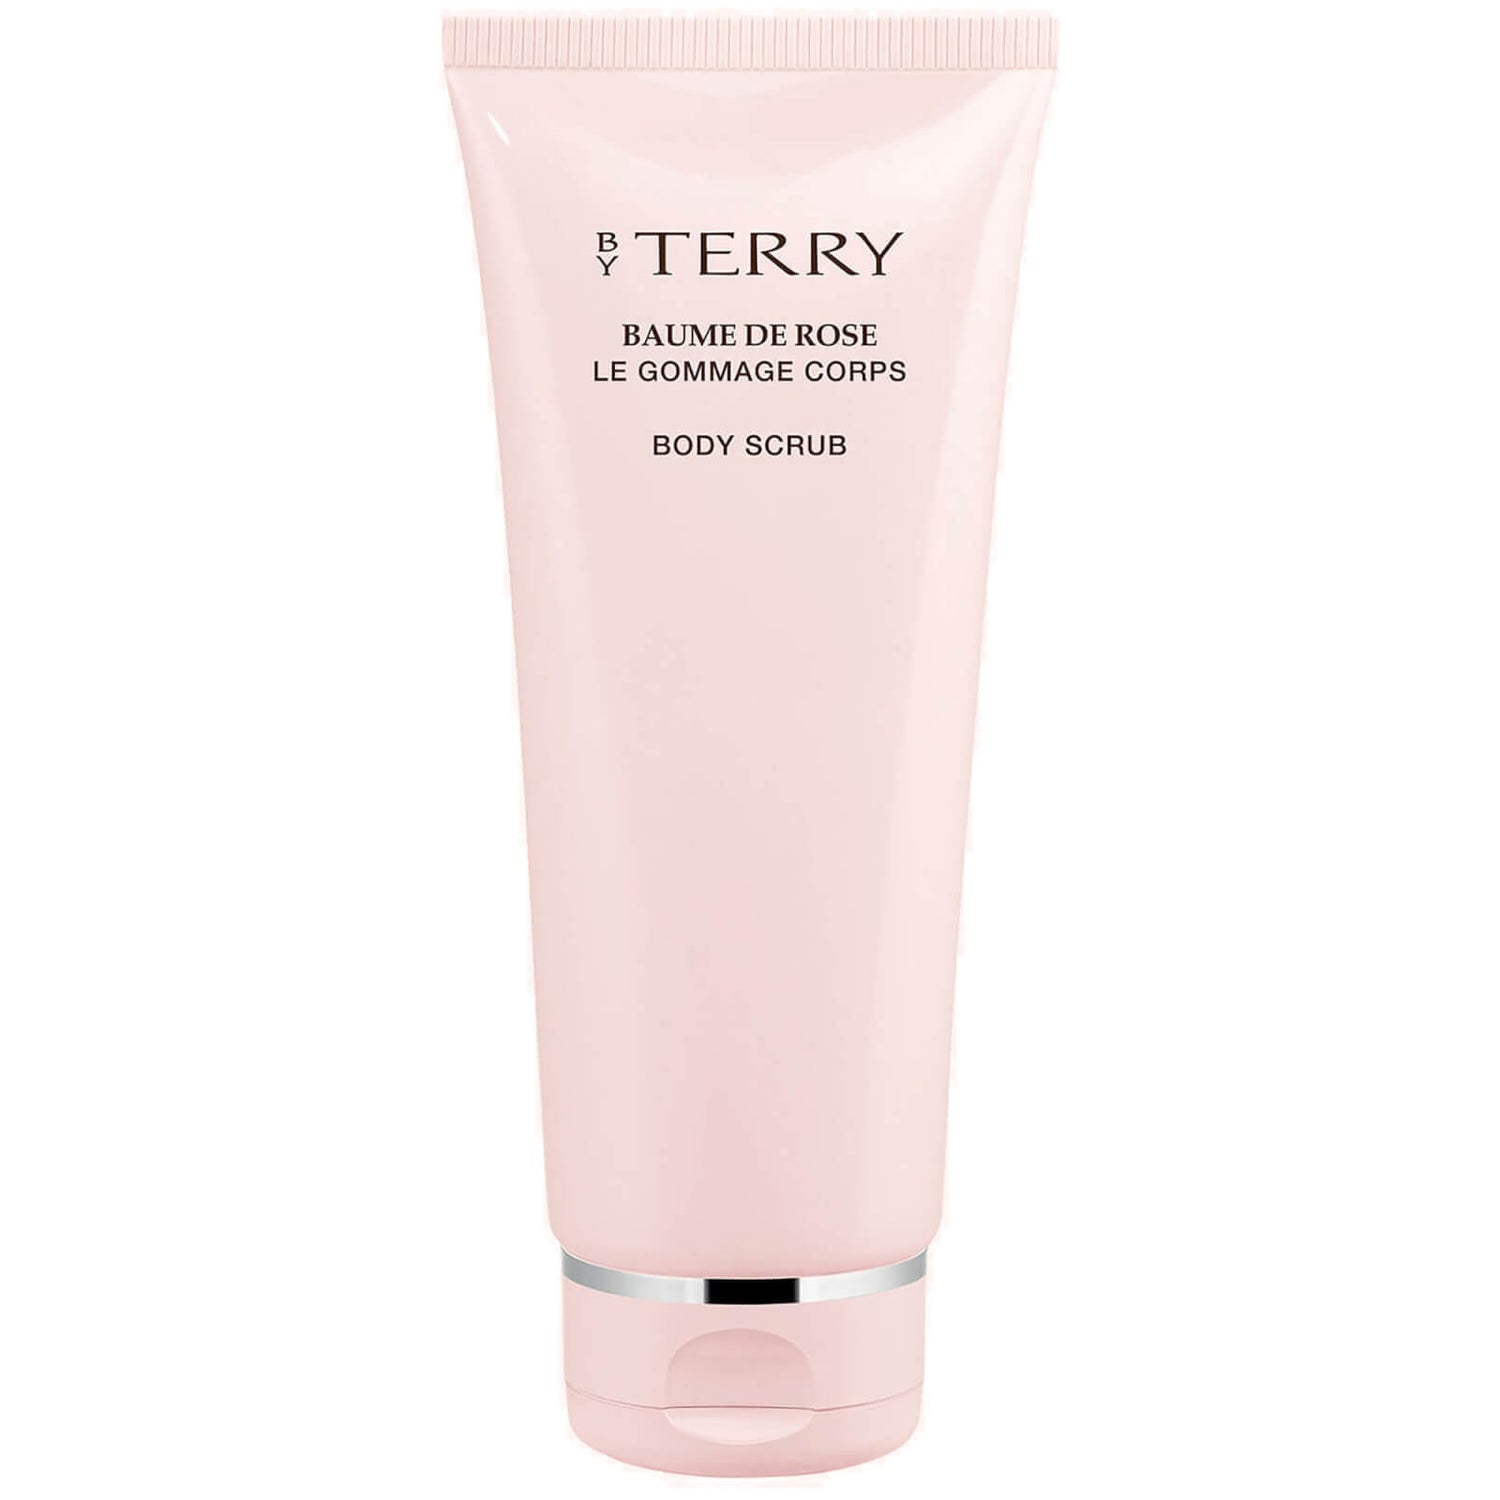 Le Gommage Corps Baume de Rose By Terry